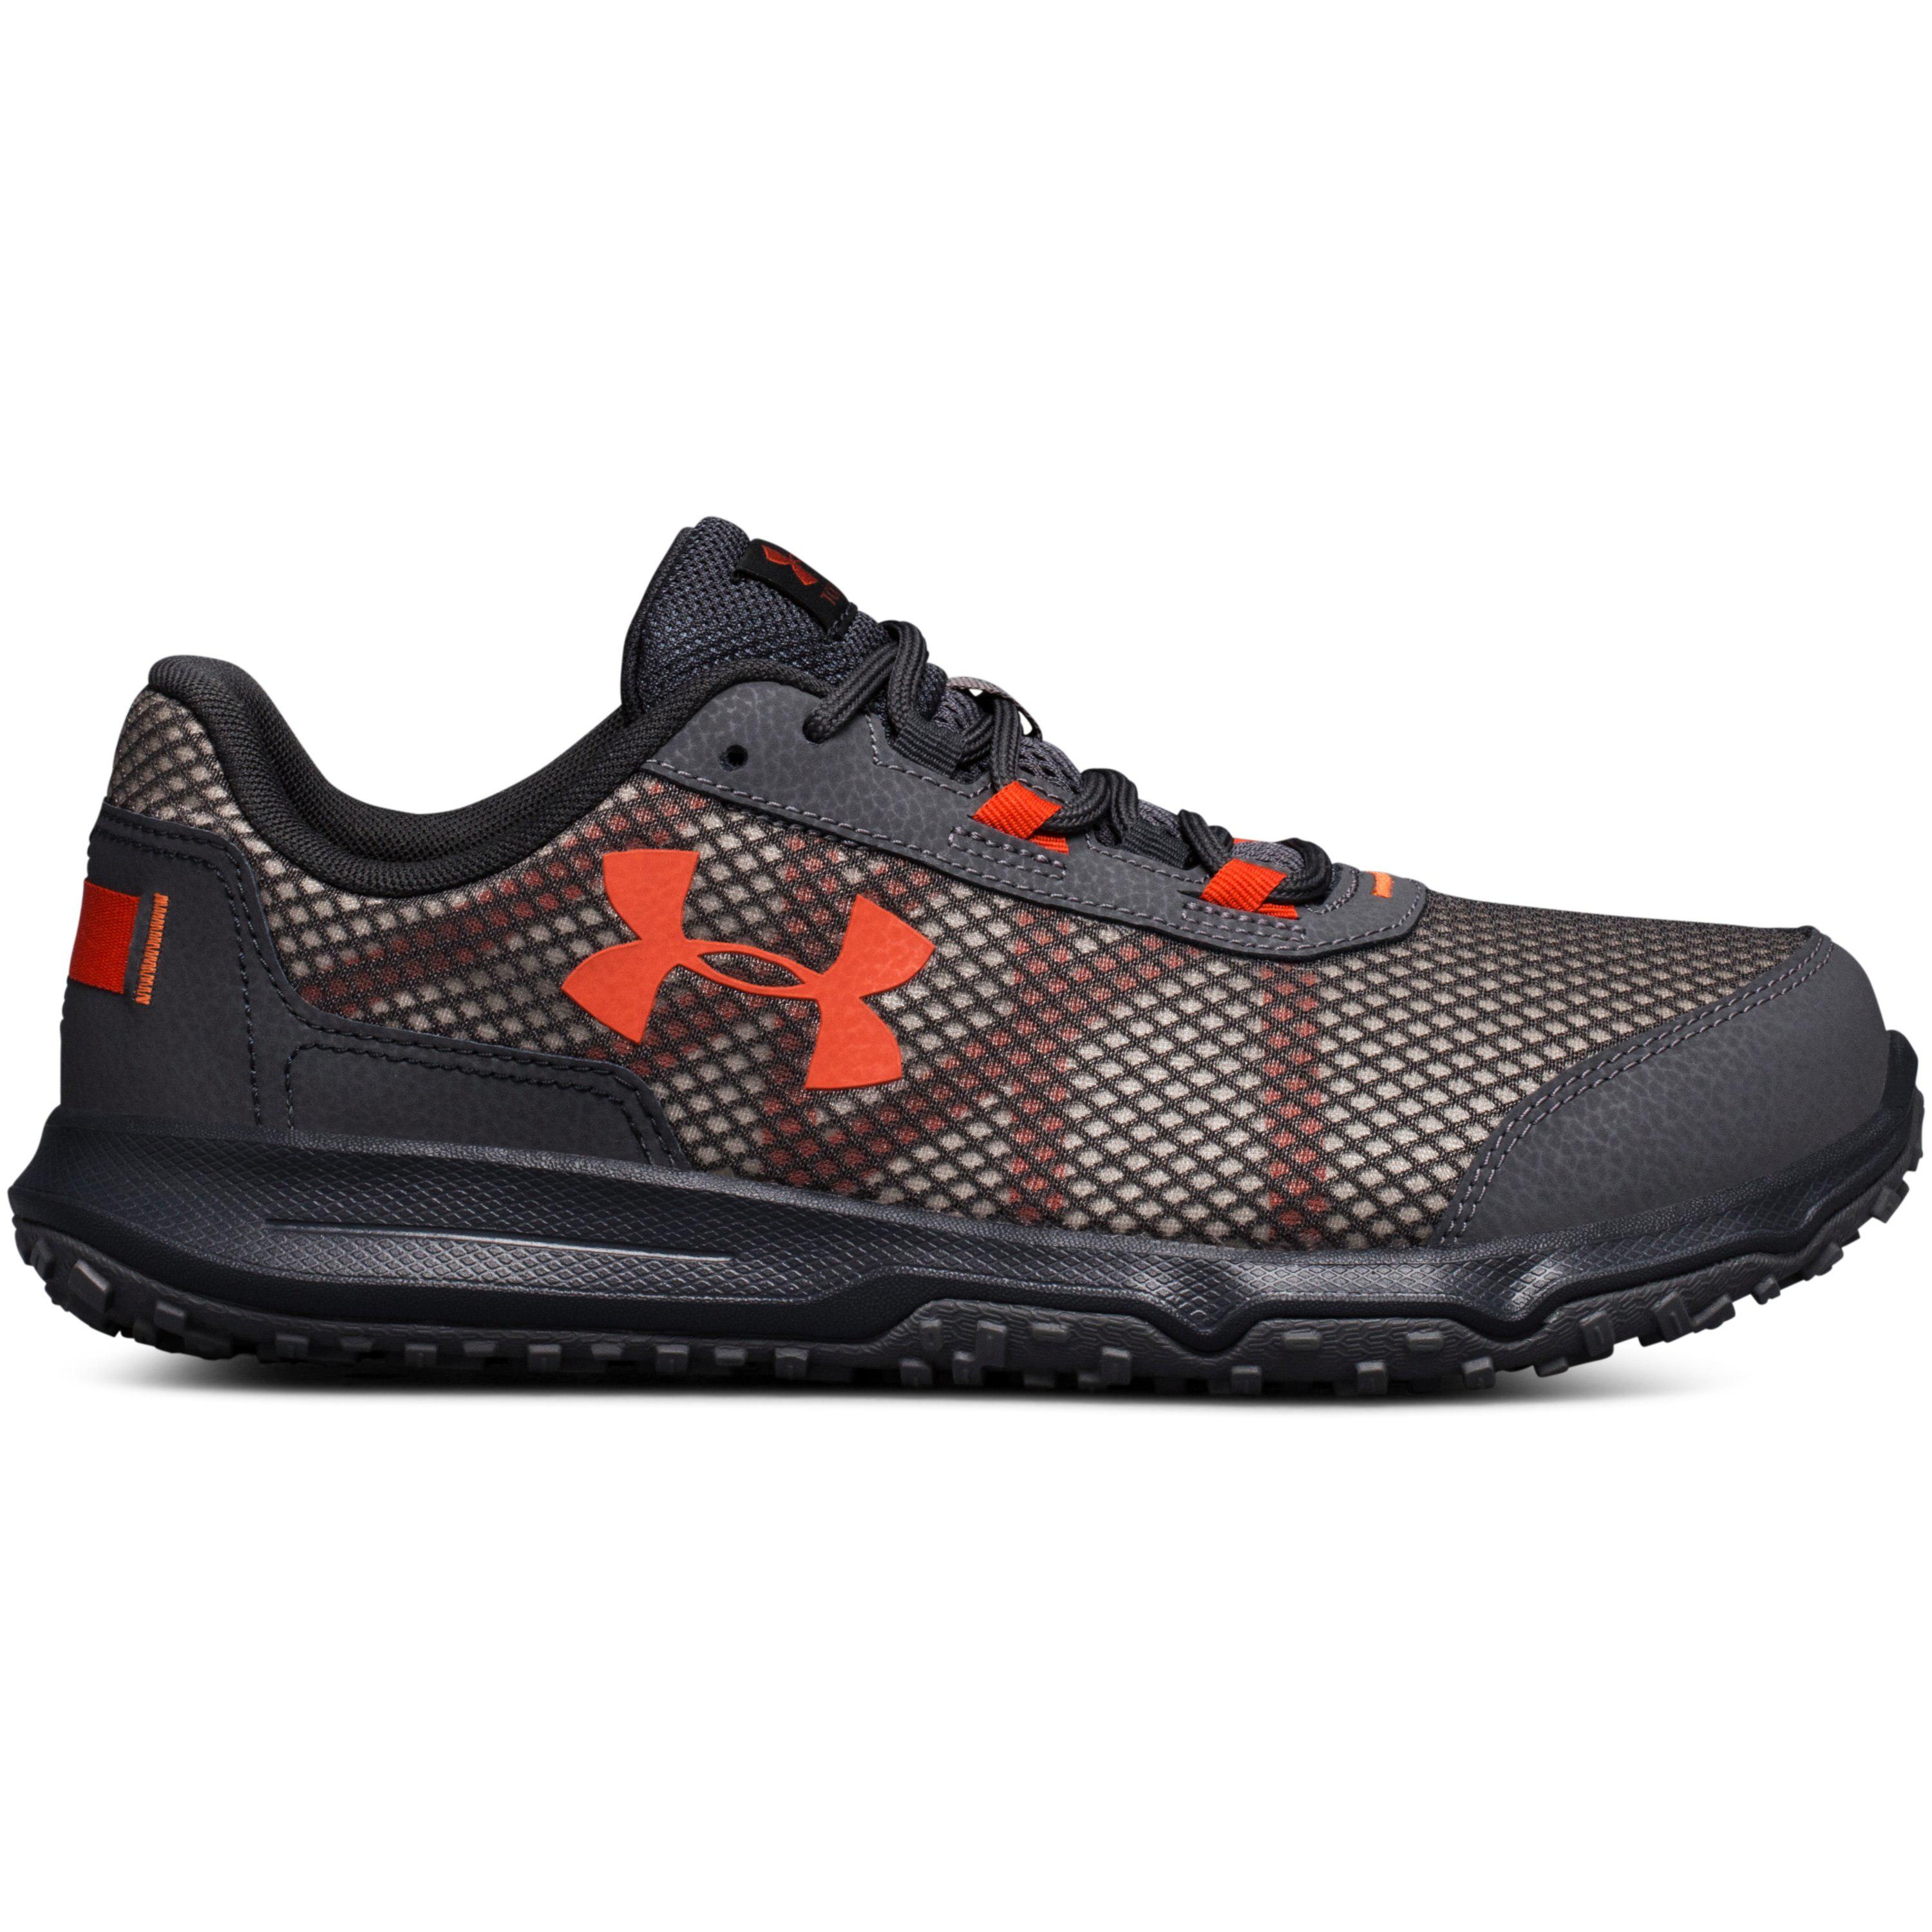 Under Armour Leather Men's Ua Toccoa – Wide (4e) Running Shoes in Gray ...